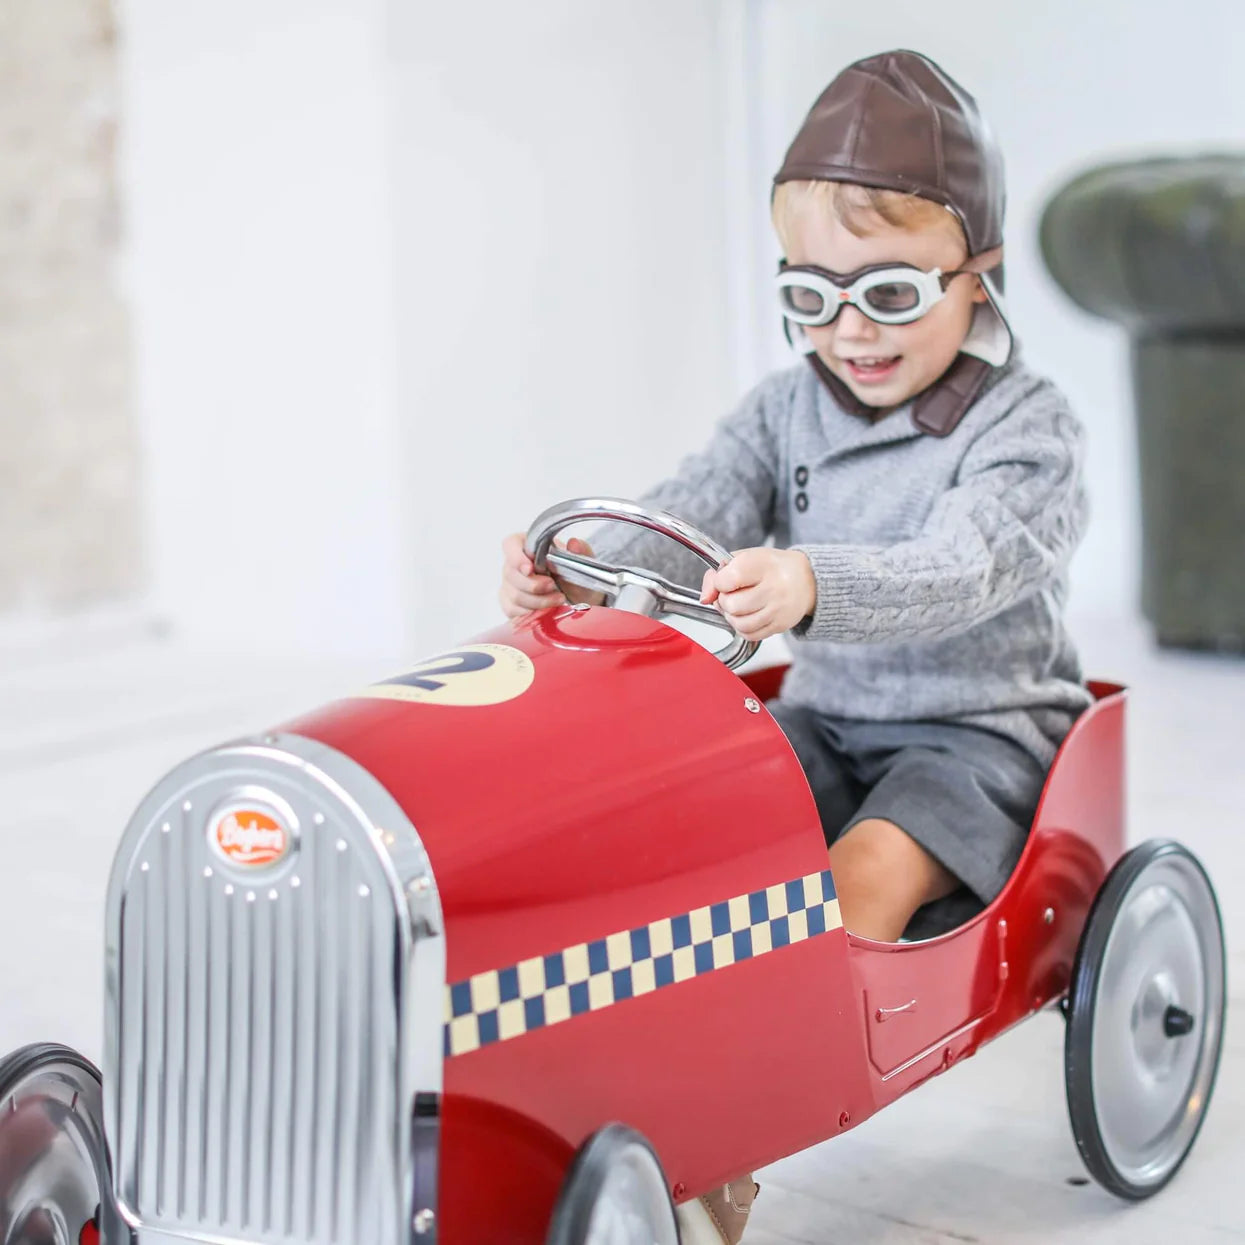 Baghera Racing Kit with hat and goggles [PRE-ORDER]